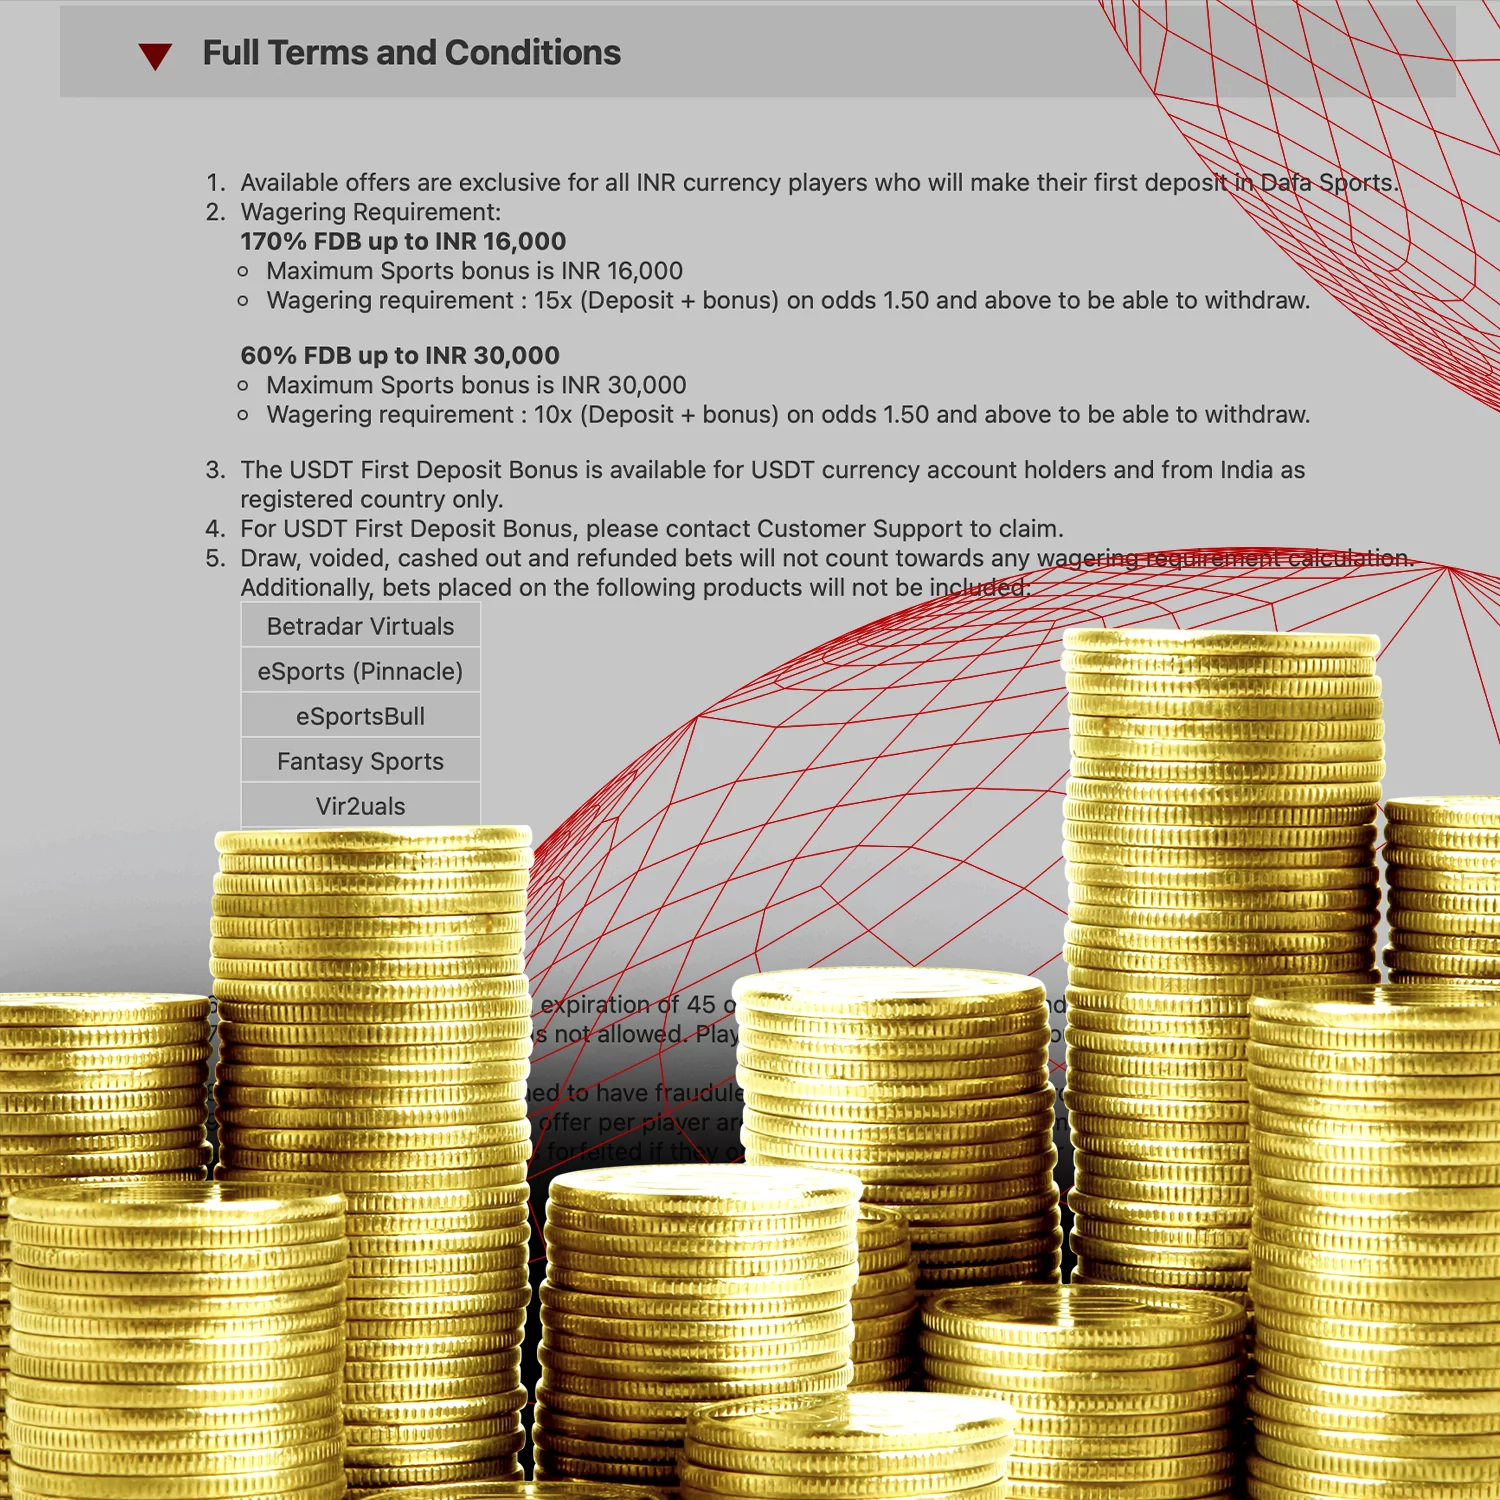 Check out Dafabet's bonus rules and conditions.